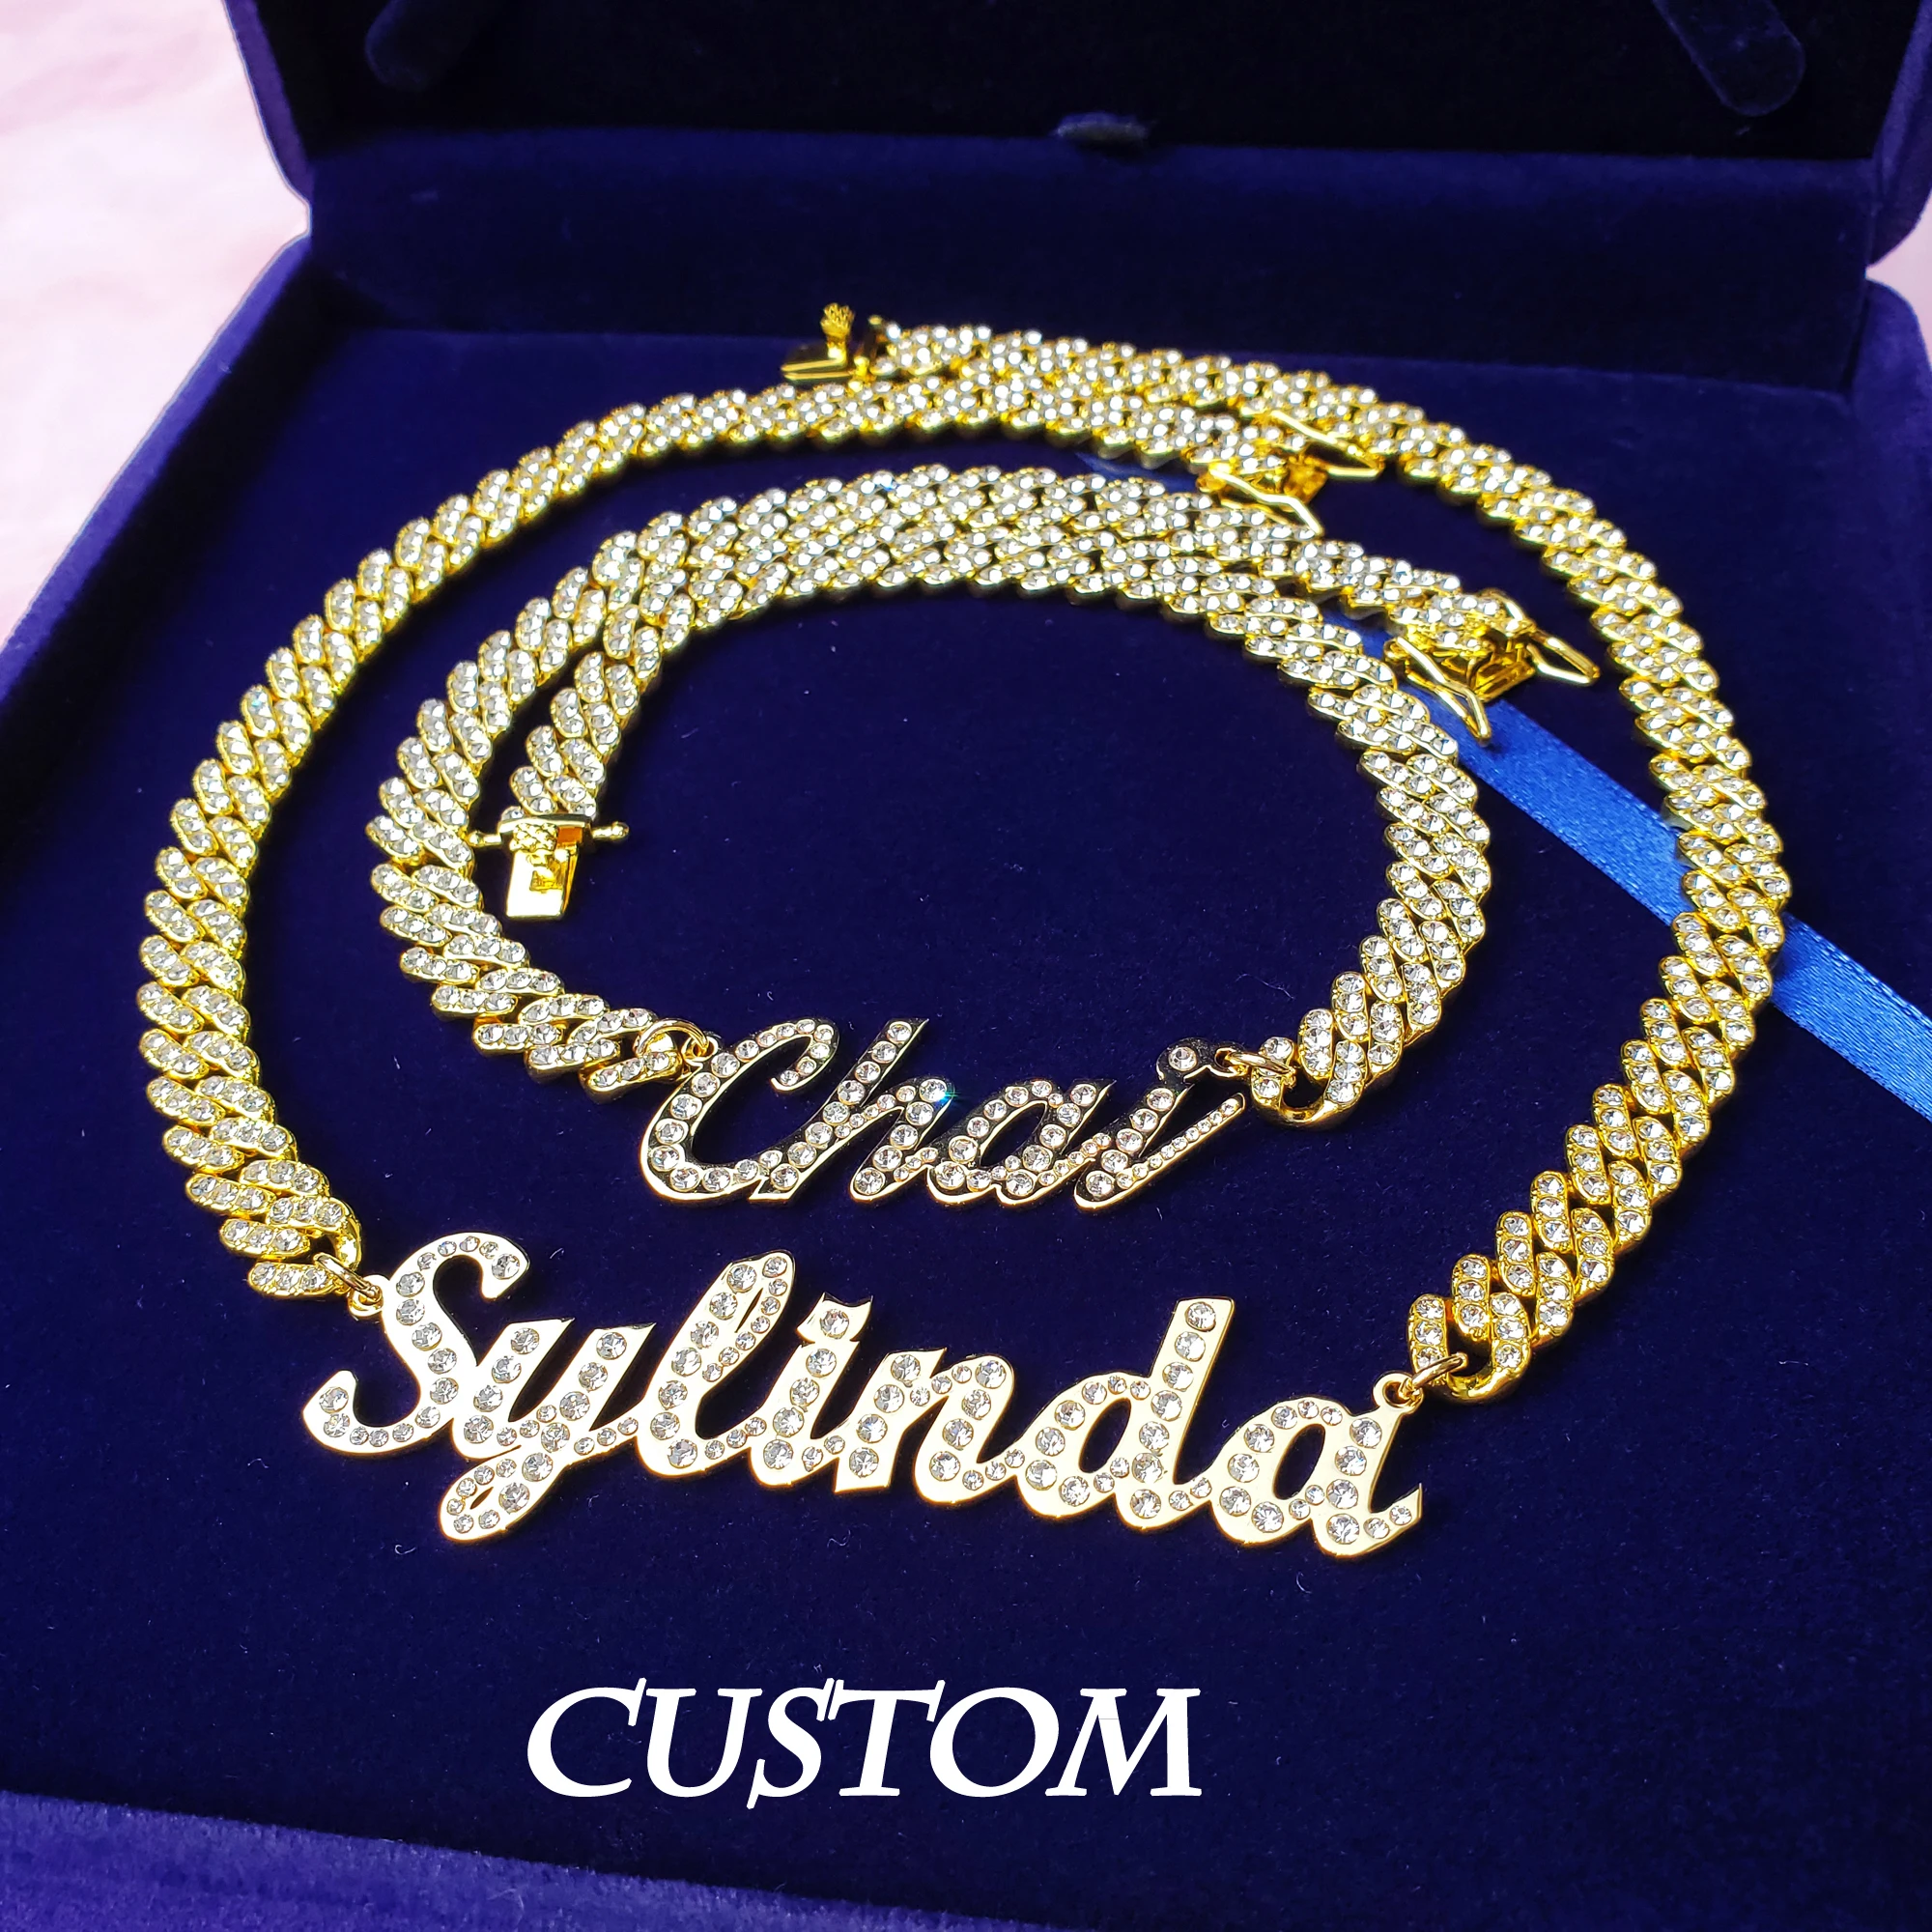 Personalized Name Necklace Stainless Steel with Rhinestone Cuban Chain Choker Necklace Perfect Gift for Her Part Prom Jewelry hollow out rhinestone decor 304 stainless steel smart watch band women slide bracelet for samsung gear s3 classic s3 frontier silver